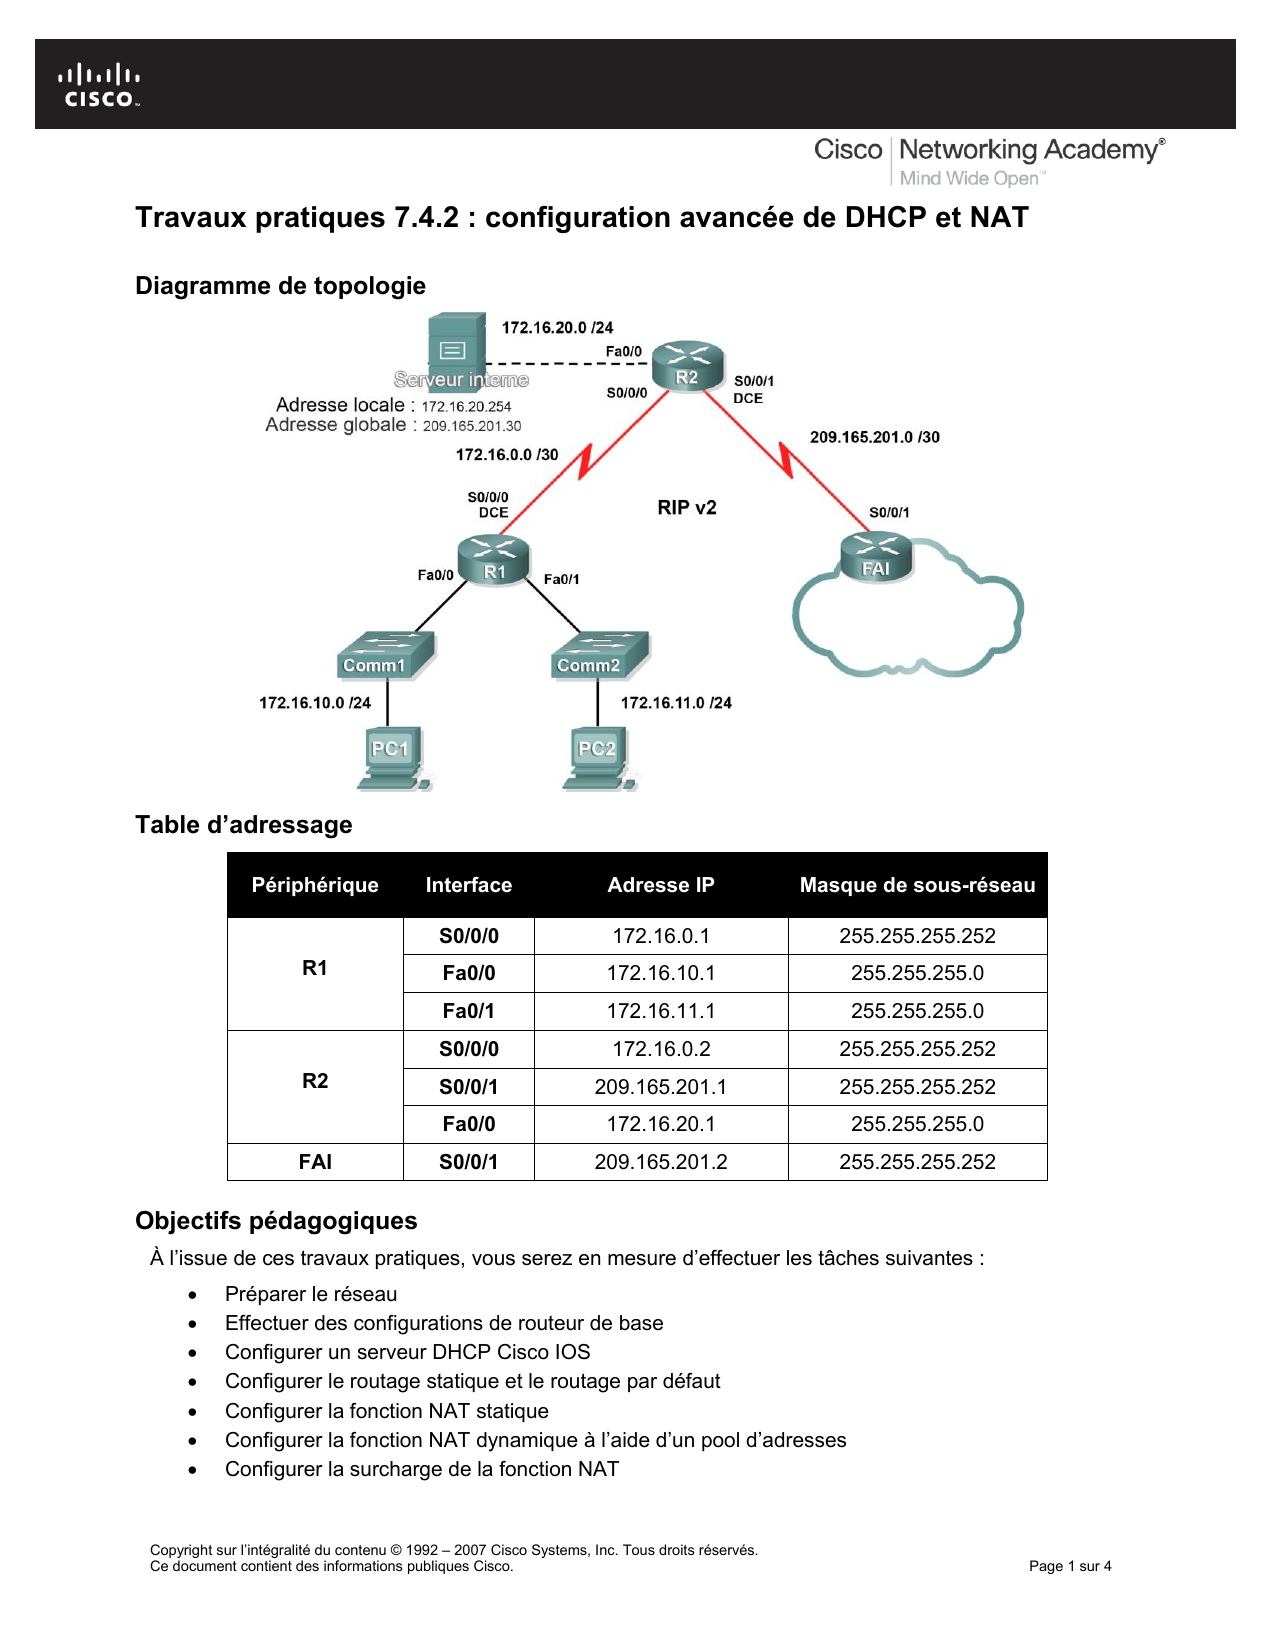 Нат лаб. Cisco Packet Tracer 9.3.4.5 troubleshooting DHCP and Nat. +375298080481 Nat configuration.